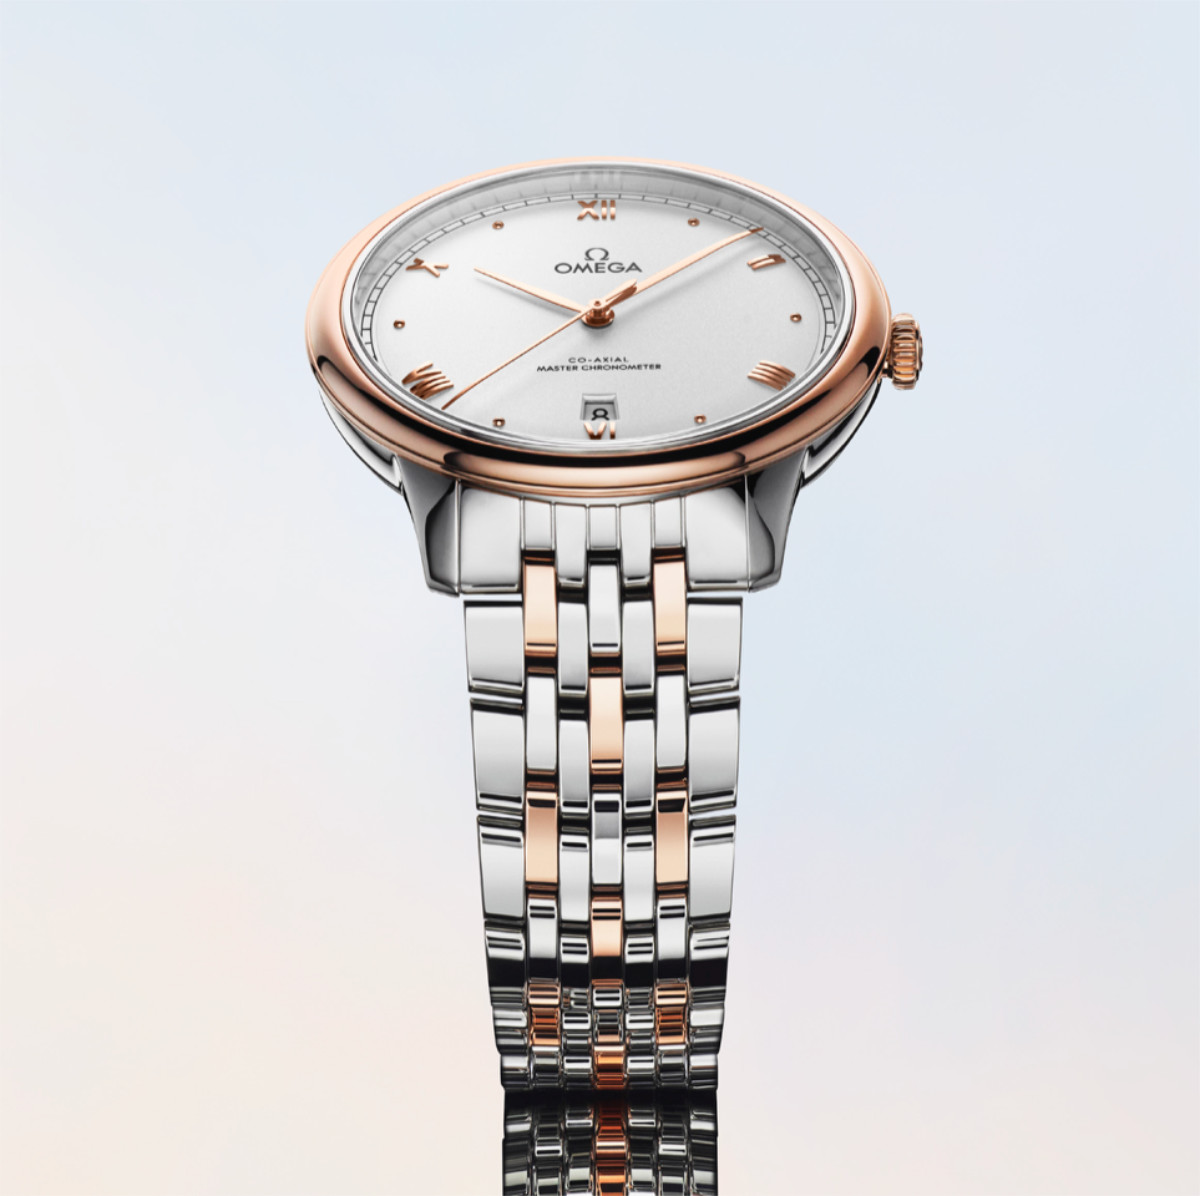 OMEGA Presents Its New De Ville Prestige Watch Collection